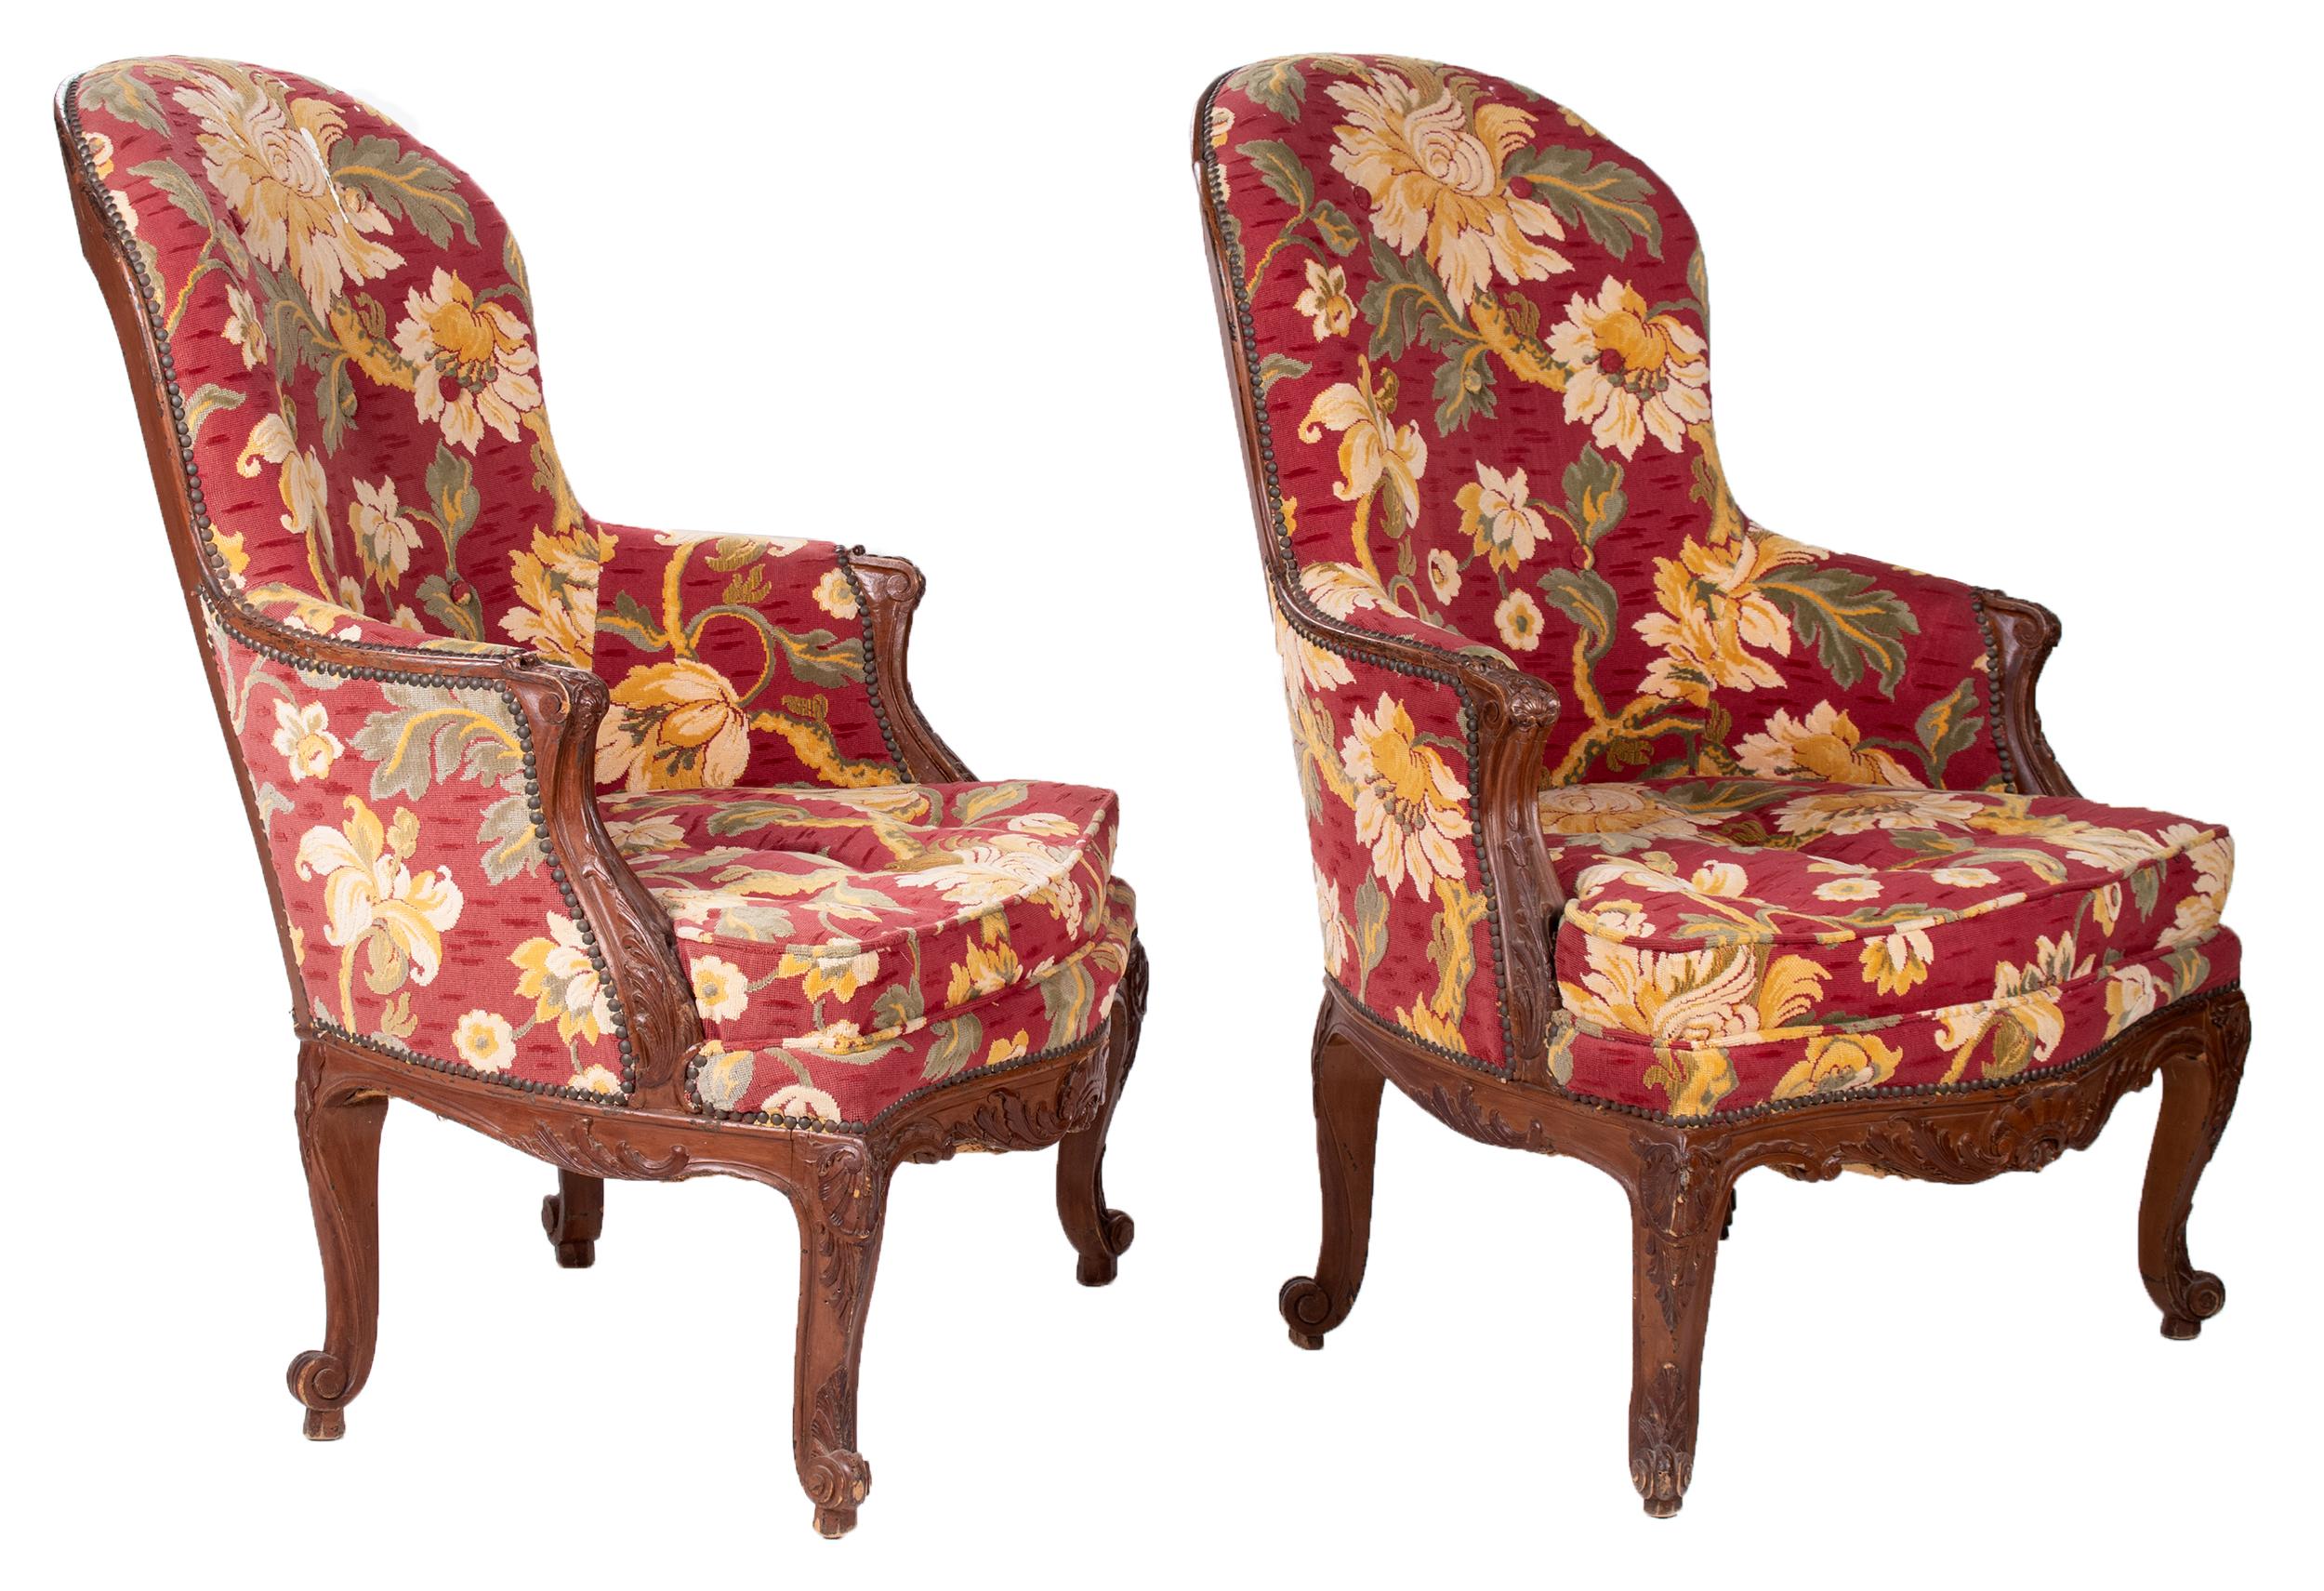 19th century pair of French floral upholstered chairs.